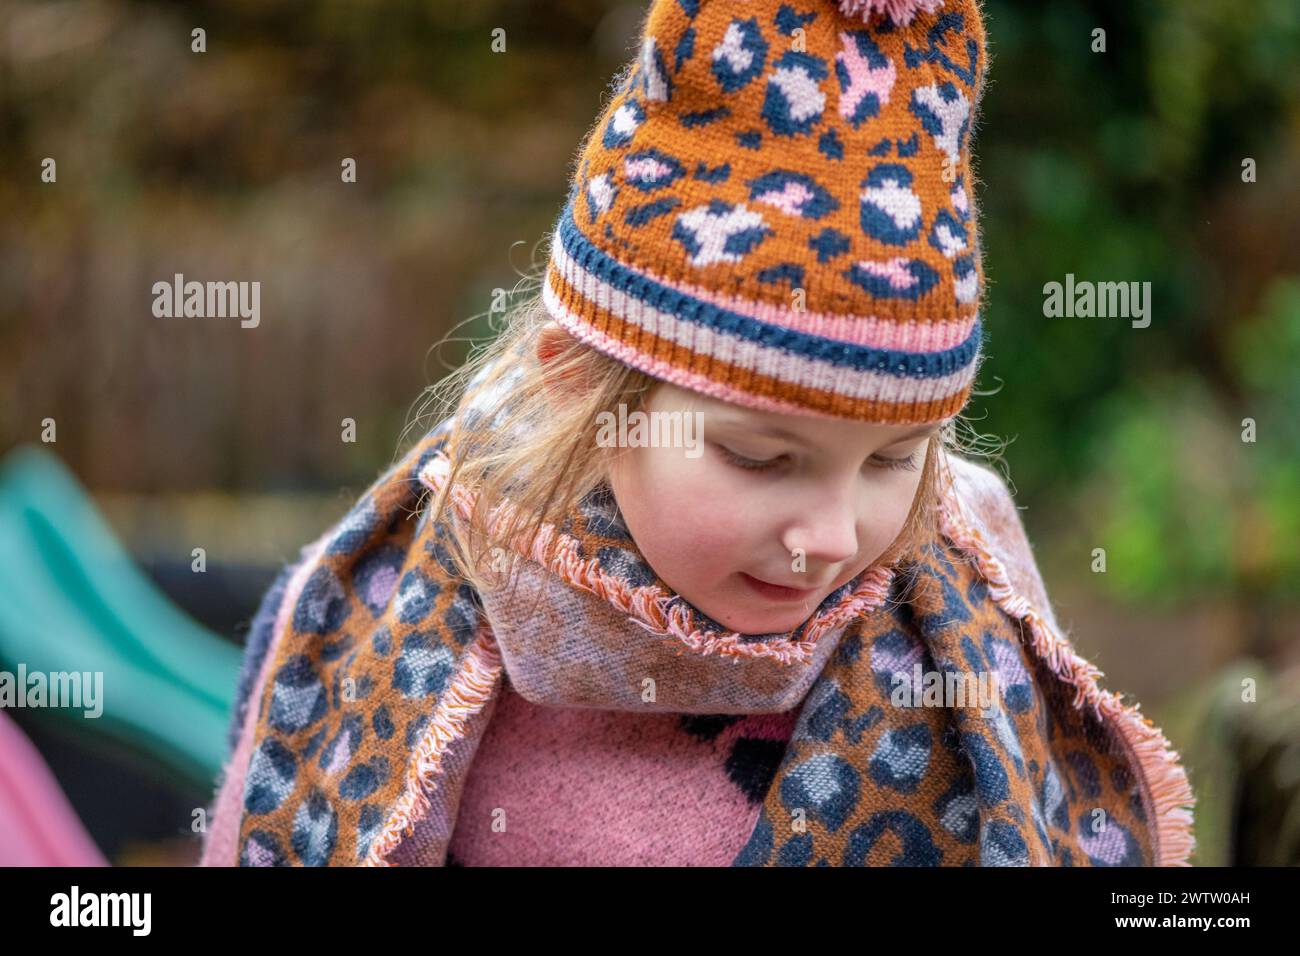 Child in a patterned hat and scarf outdoors Stock Photo